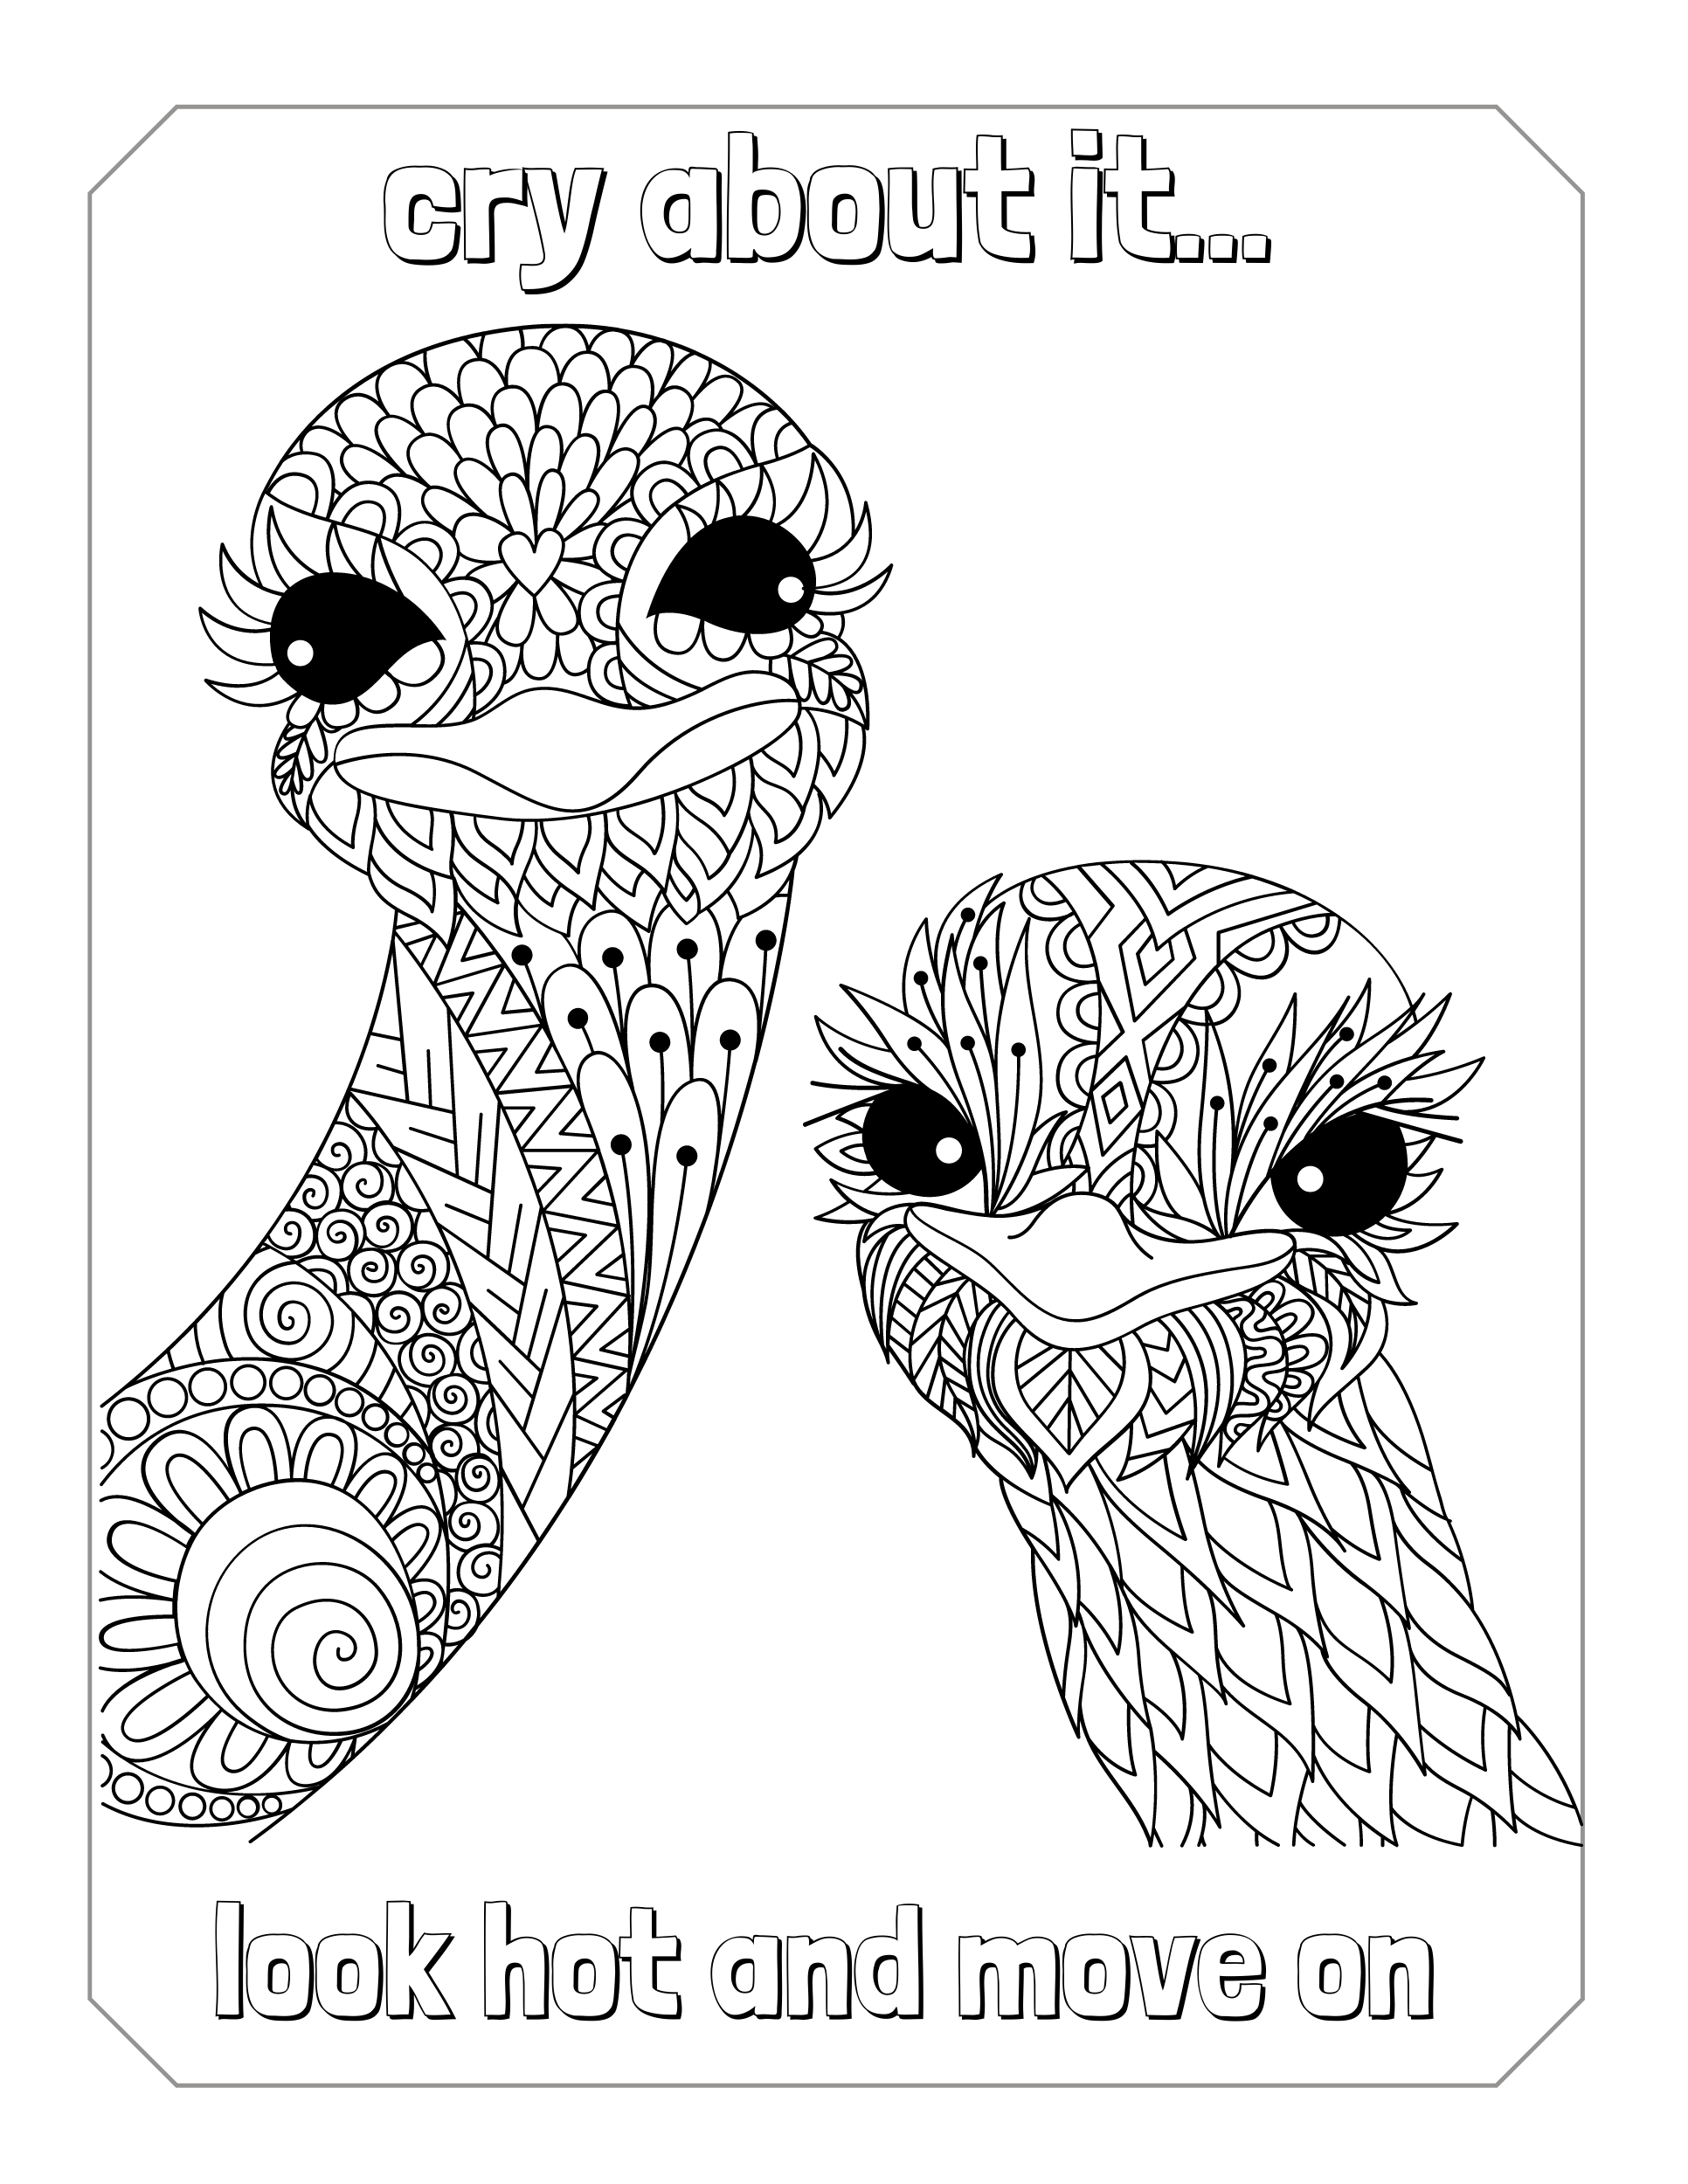 Adult Coloring Book Swear Words, Adult Humor Coloring Pages, Downloadable  Adult Humor Swear Words Coloring Pages, Printable Coloring Pages 